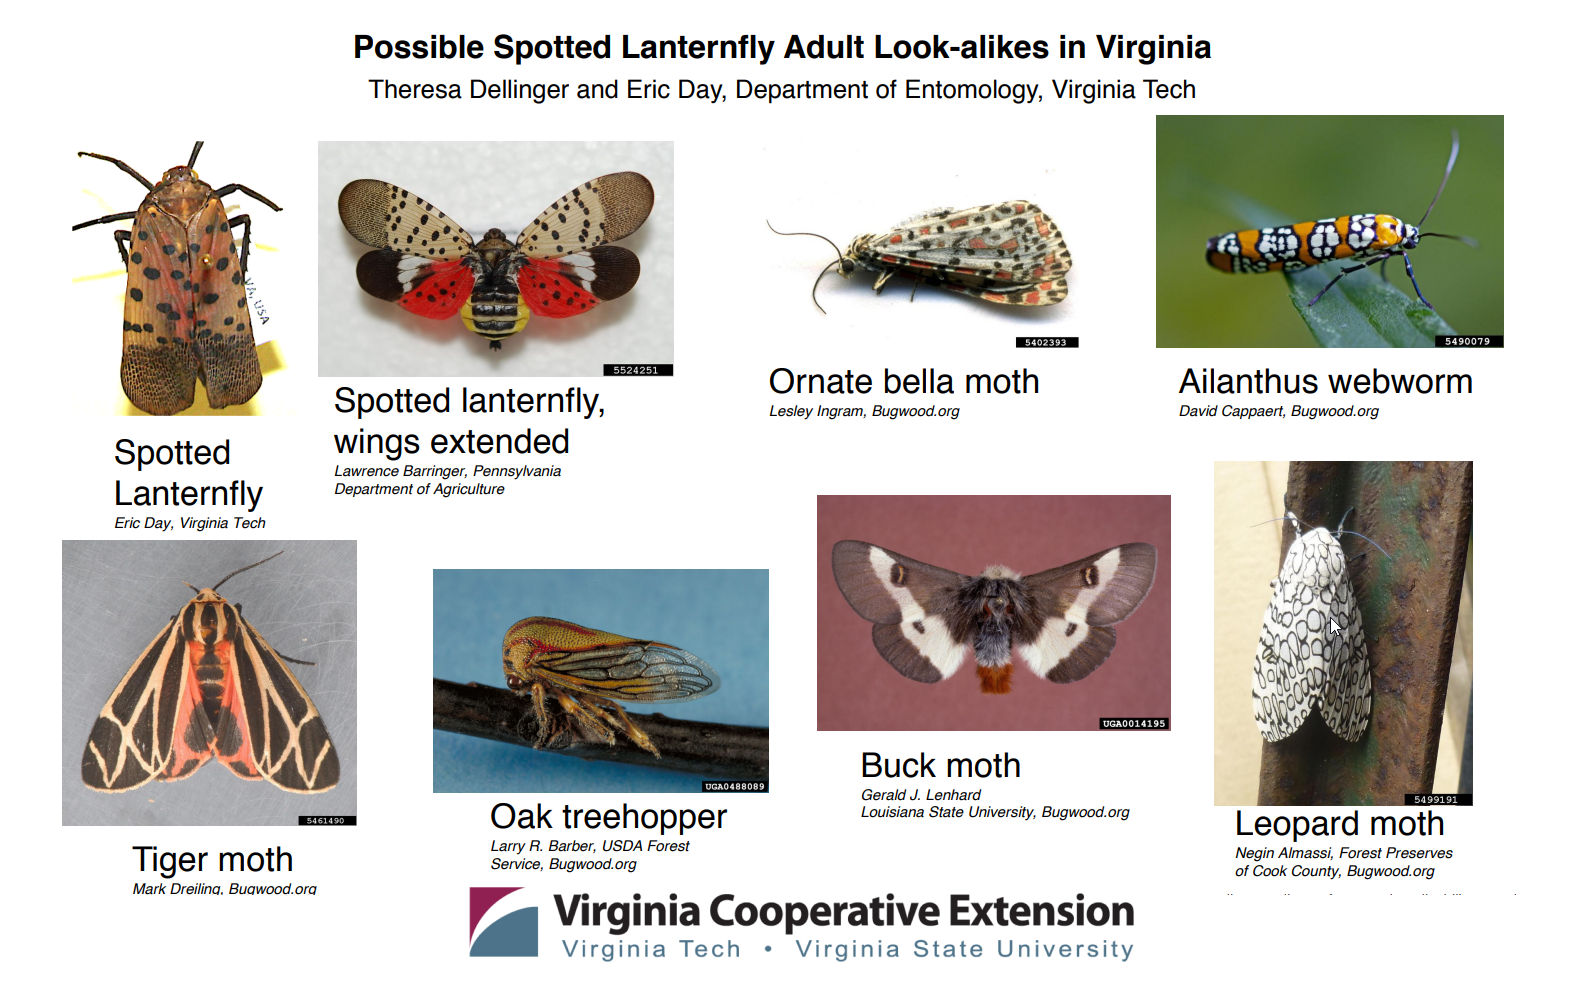 Possible Spotted Lanternfly Adult look-alikes in Virginia. Theresa Dellinger and Eric Day, Department of Entomology, Virginia Tech. Spotted Lanternfly, Spotted Lanternfly wings extended, Ornate bella moth, Ailanthus webworm, Tiger moth, Oak treehopper, Buck moth, Leopard moth. Virginia Cooperative Extension